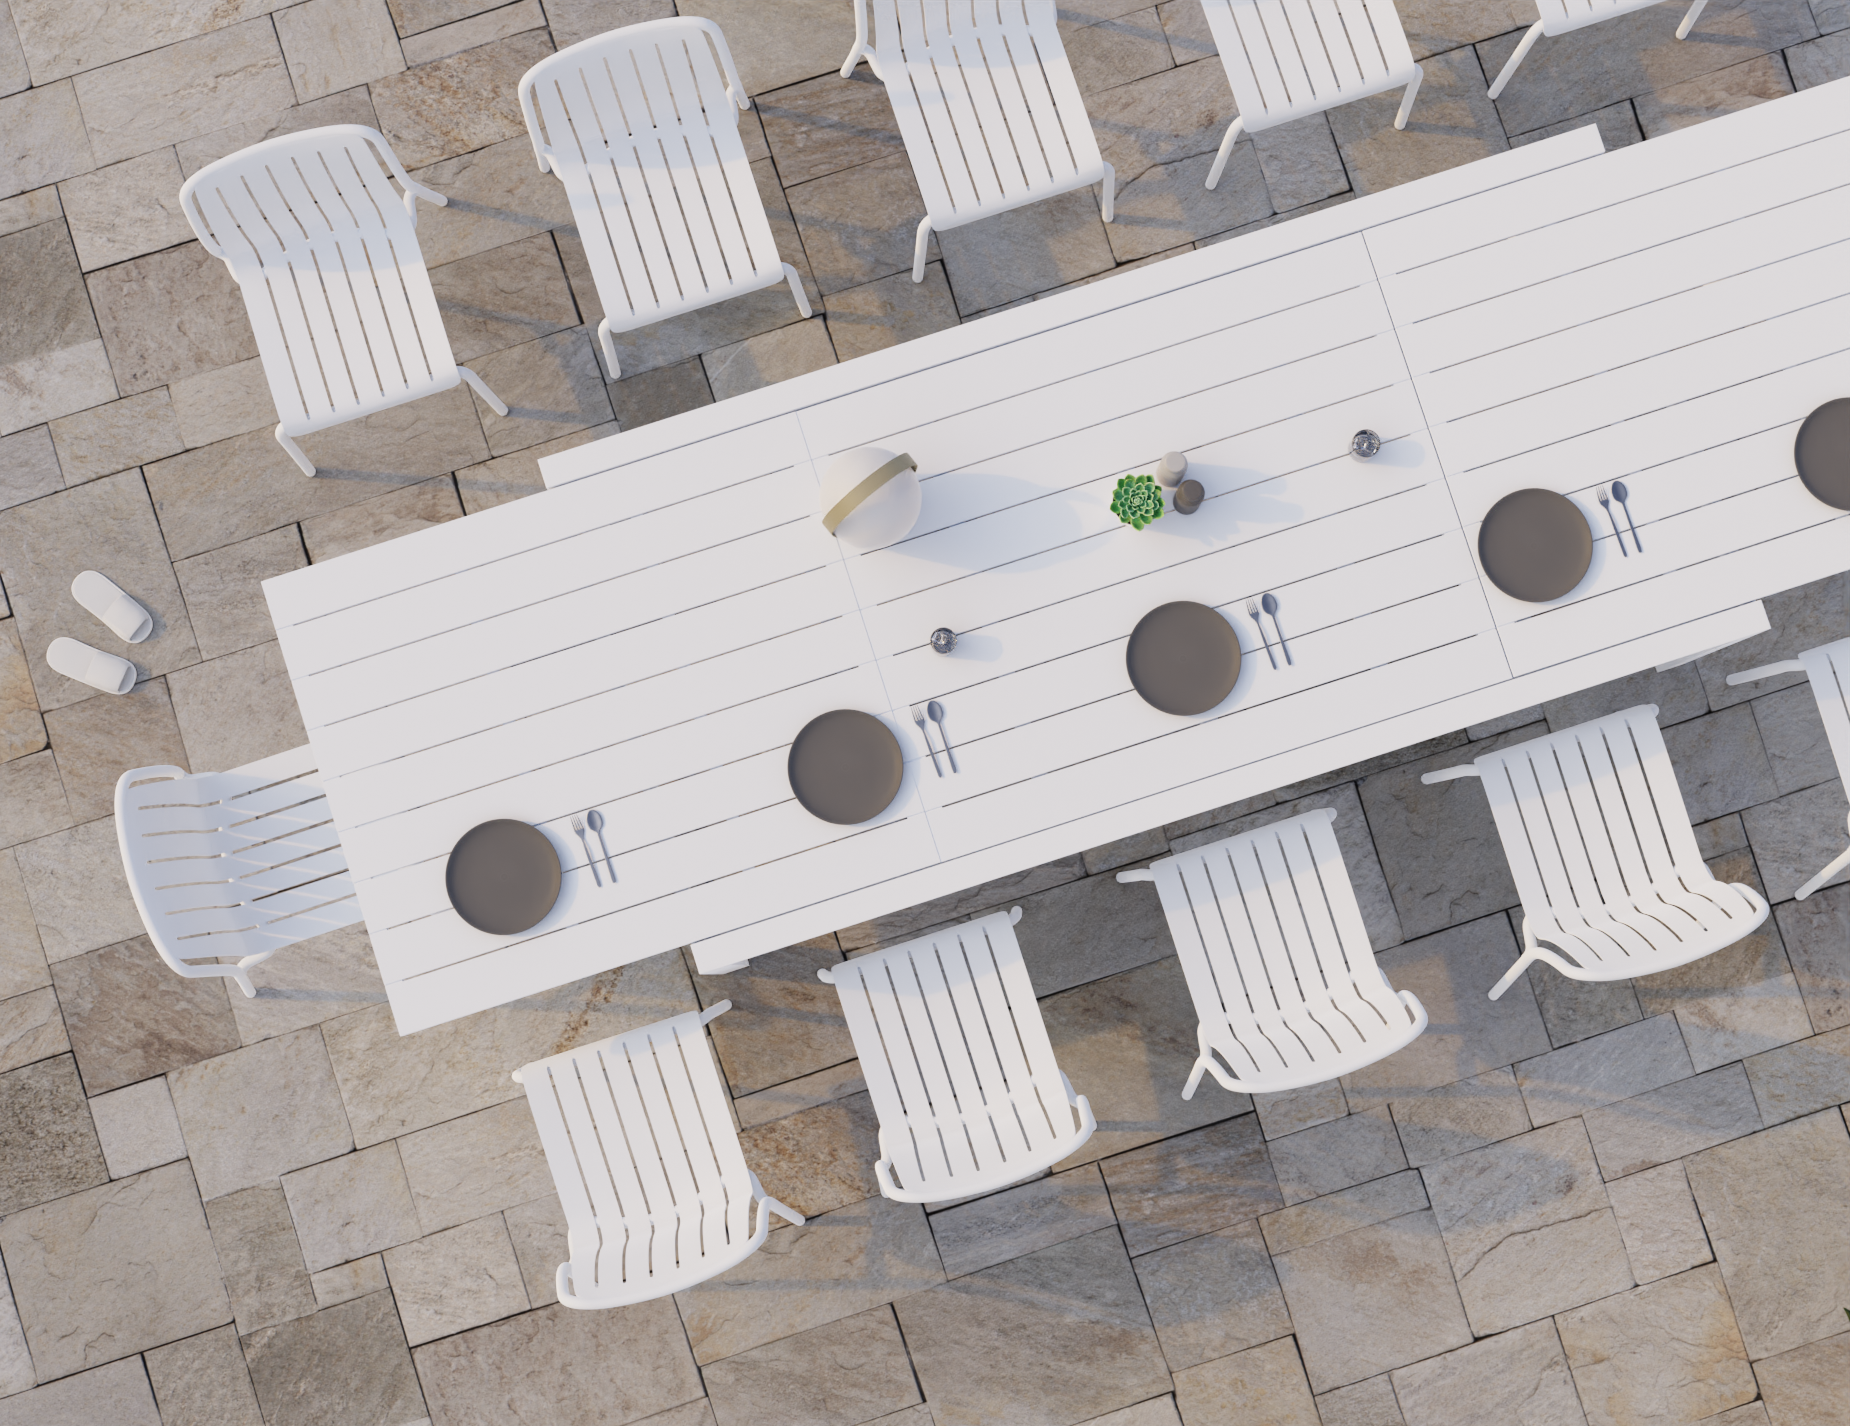 Reflect Outdoor Extendable Dining Table - White